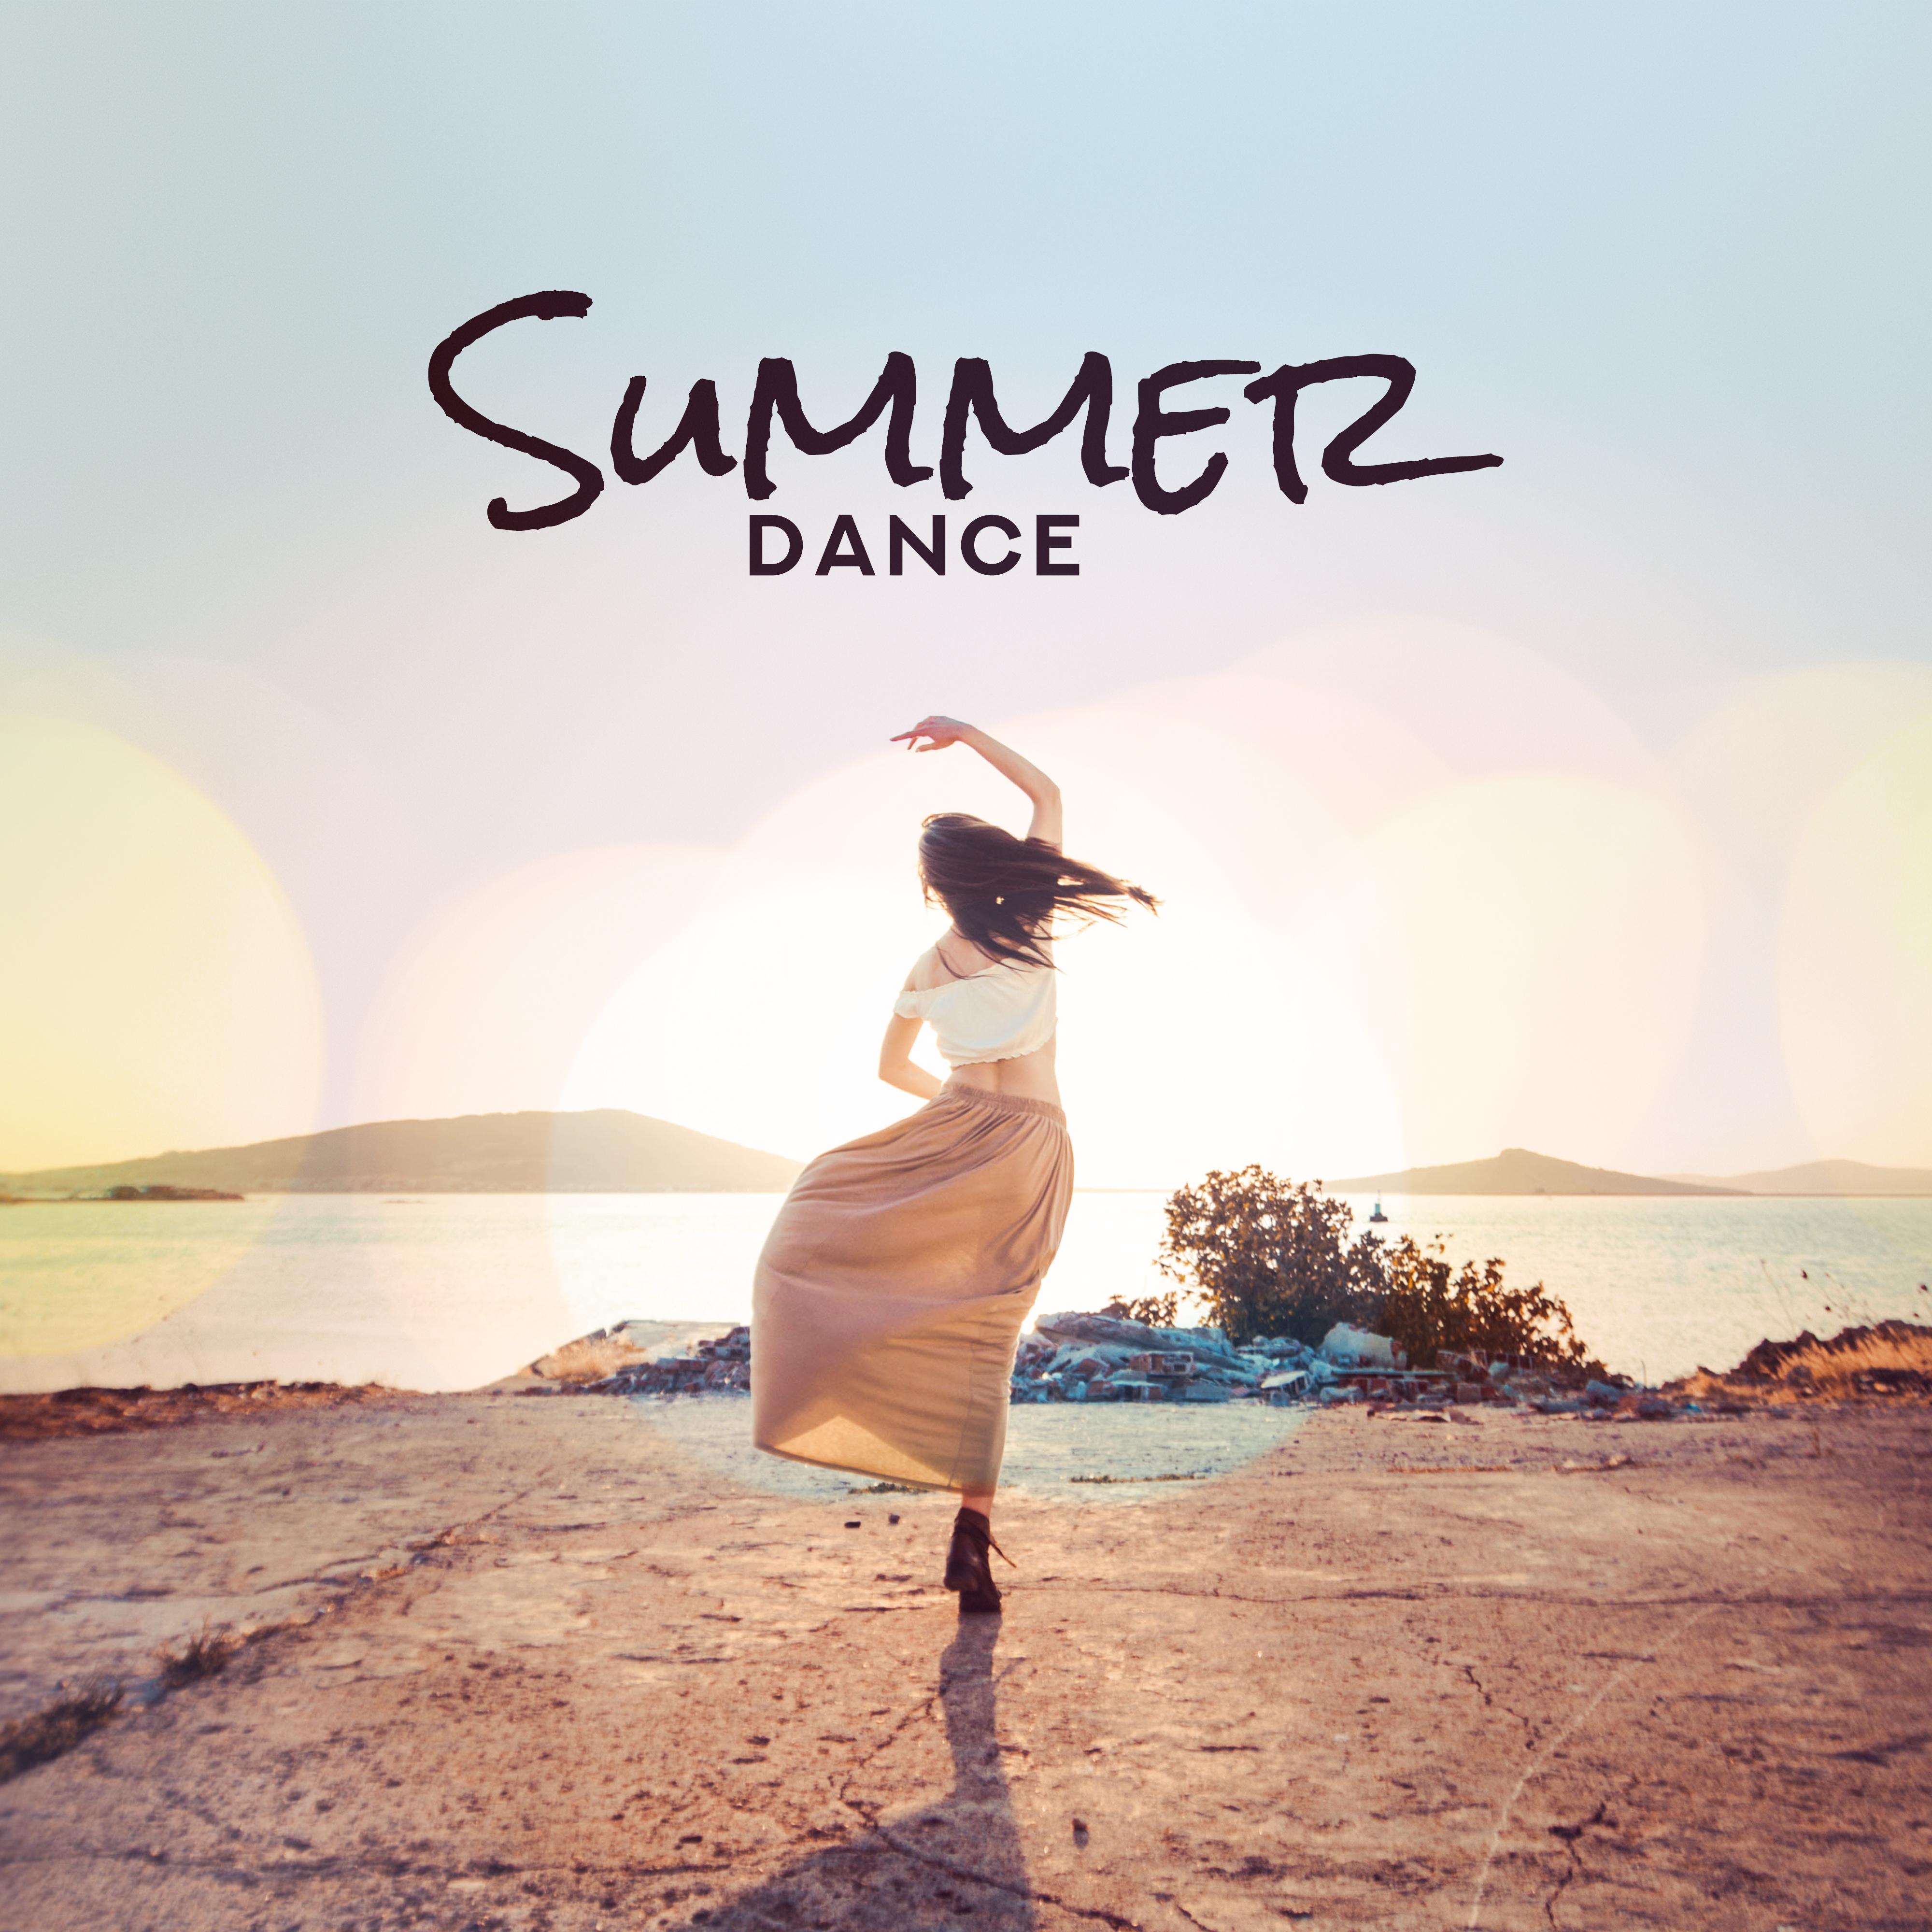 Summer Dance: Ibiza Lounge, Party Hits, Chill Out 2019, Ibiza Dance Party, New Beats 2019, Night Party